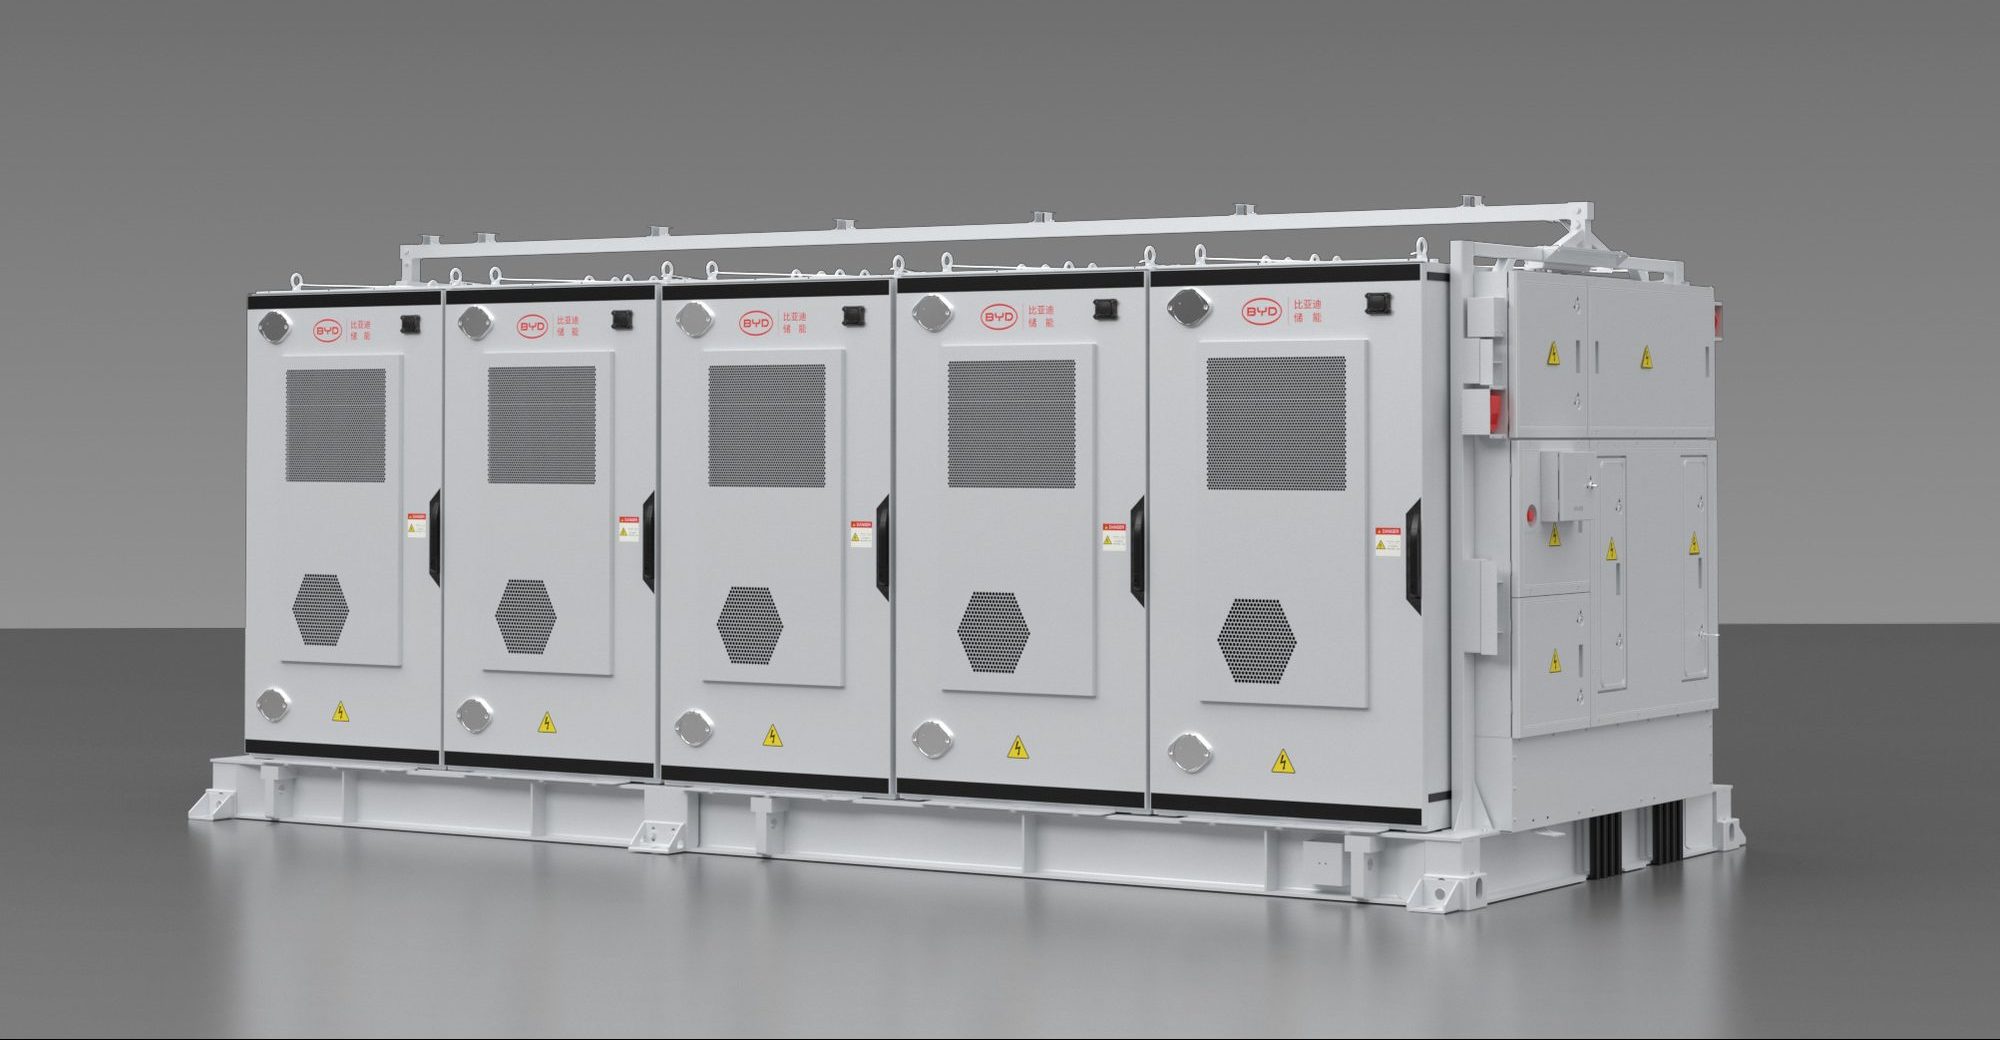 BYD to power world’s largest energy storage system in Chile · TechNode #chicomnews